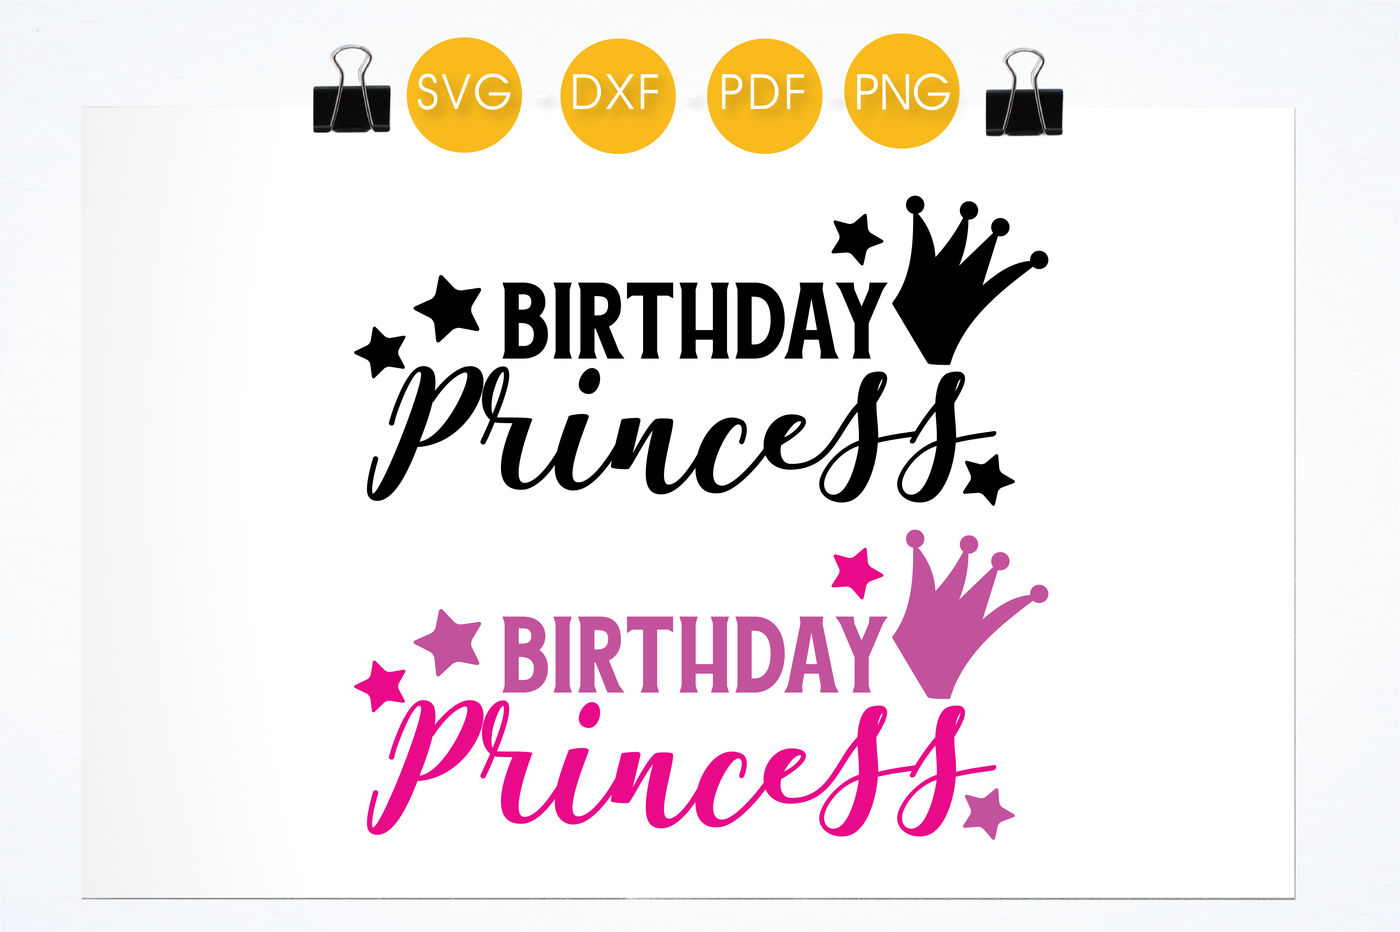 Birthday Princess Svg Png Eps Dxf Cut File By Prettycuttables Thehungryjpeg Com